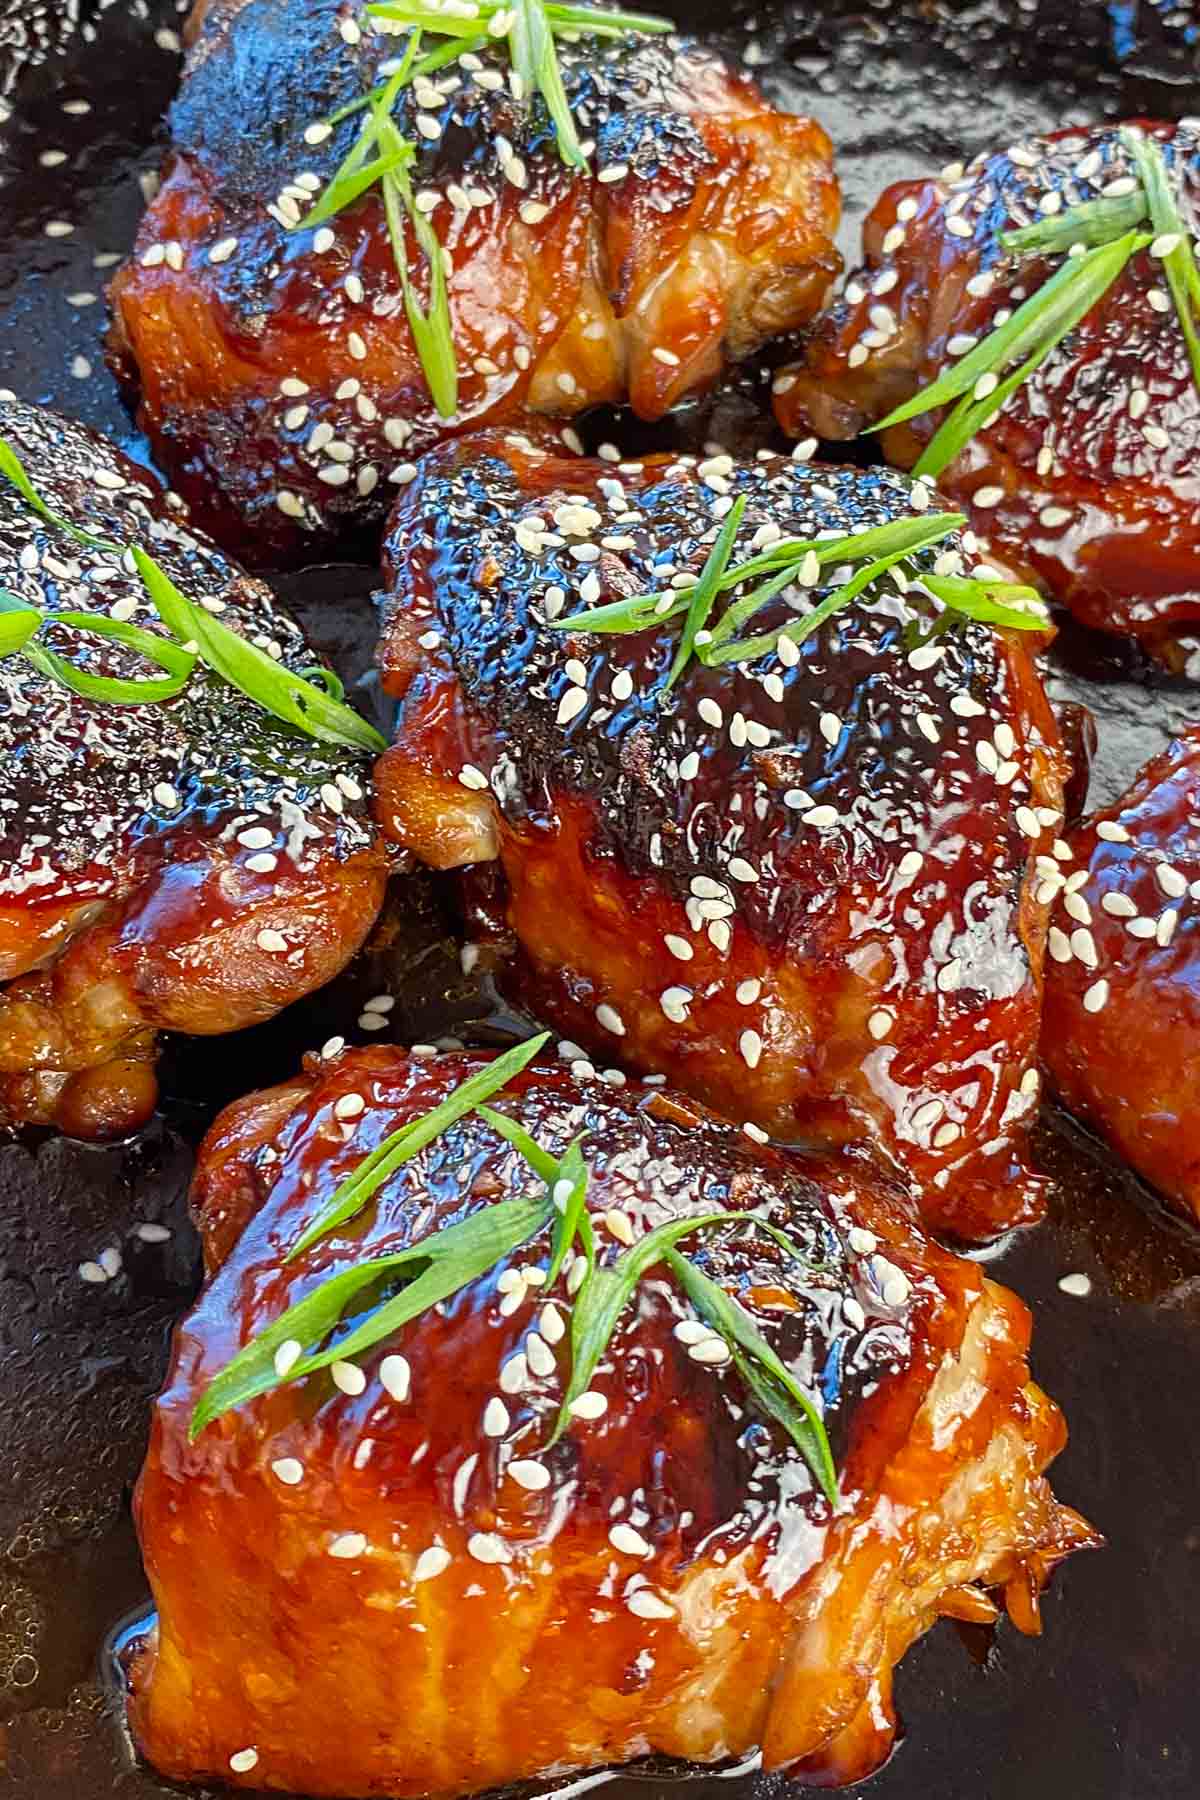 Baked chicken thighs glazed with teriyaki sauce, garnished with green onions and sesame seeds.